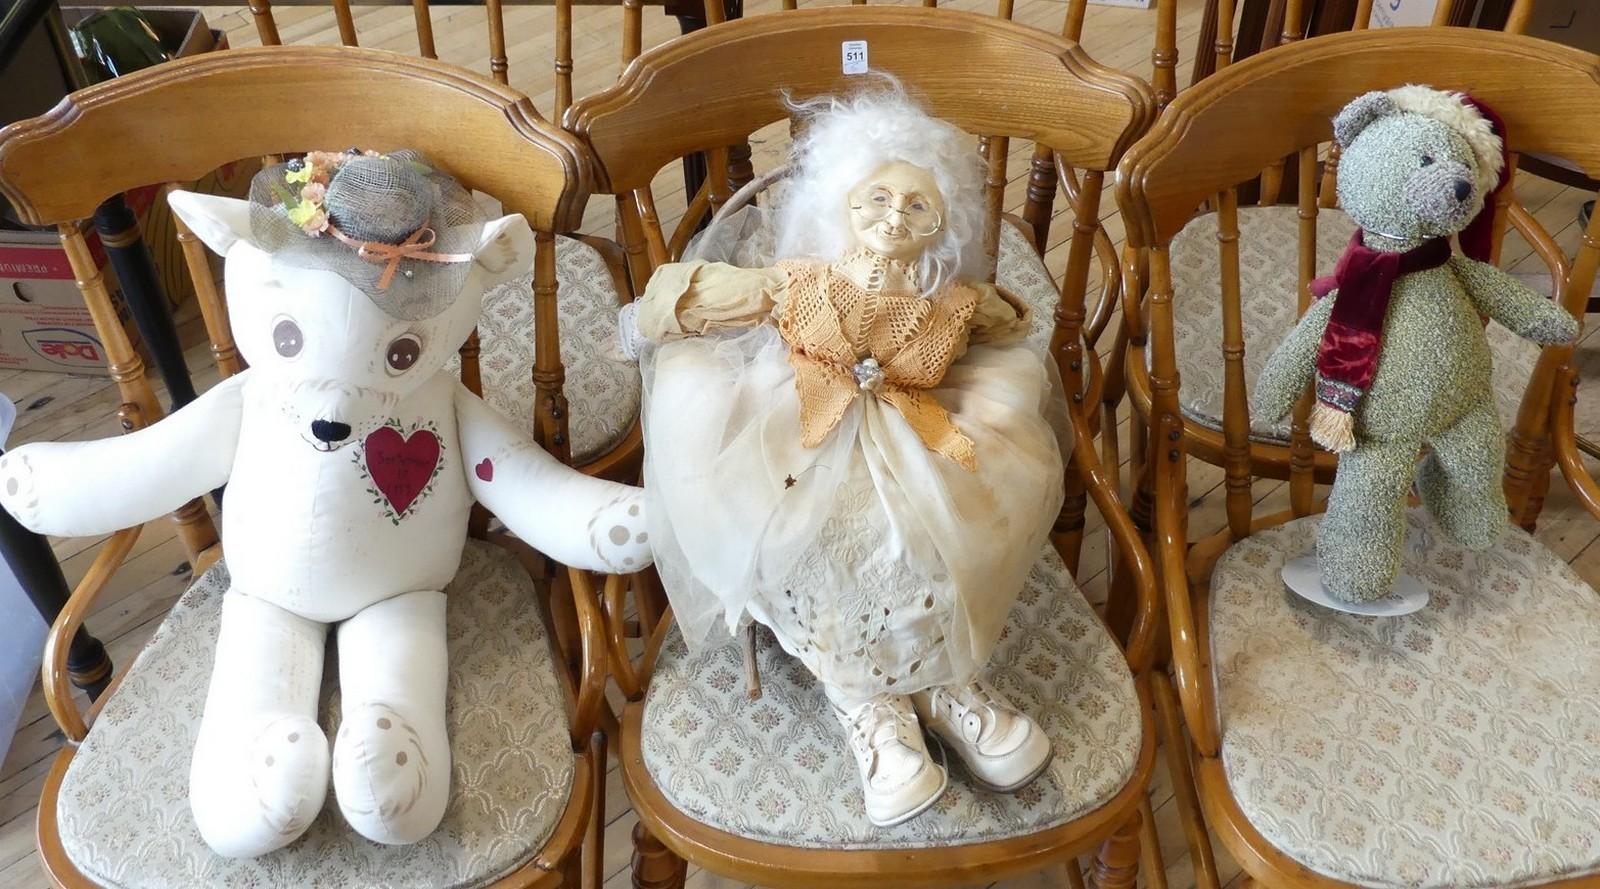 TWO TEDDY BEARS, DOLL AND CHAIR